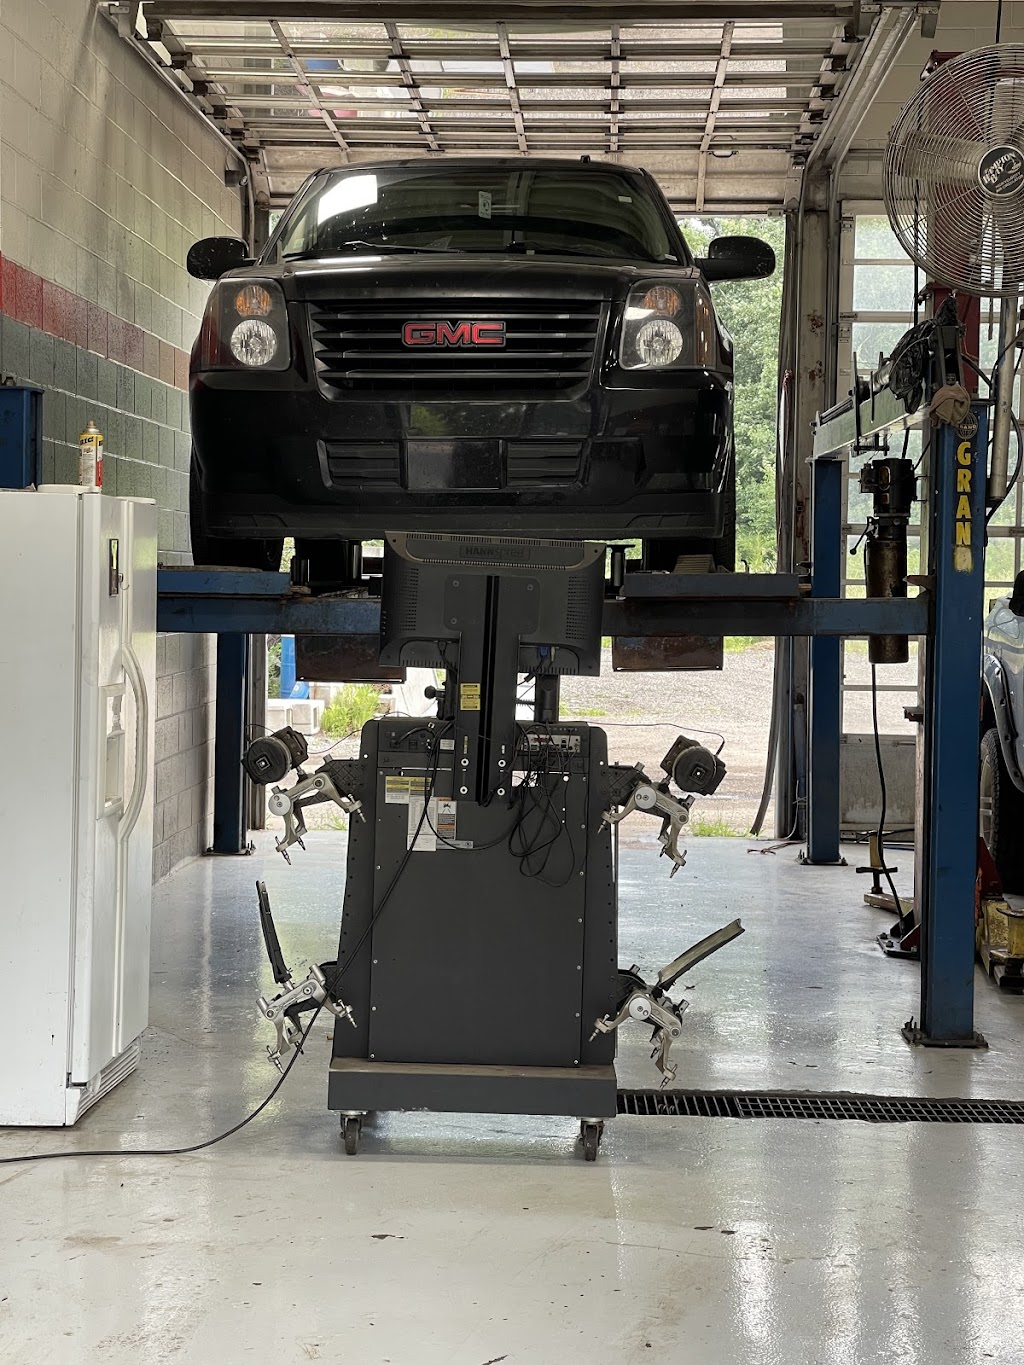 Complete Auto Center Pro - car repair  | Photo 2 of 7 | Address: 6900 Cooley Lake Rd, Waterford Twp, MI 48327, USA | Phone: (248) 623-1400